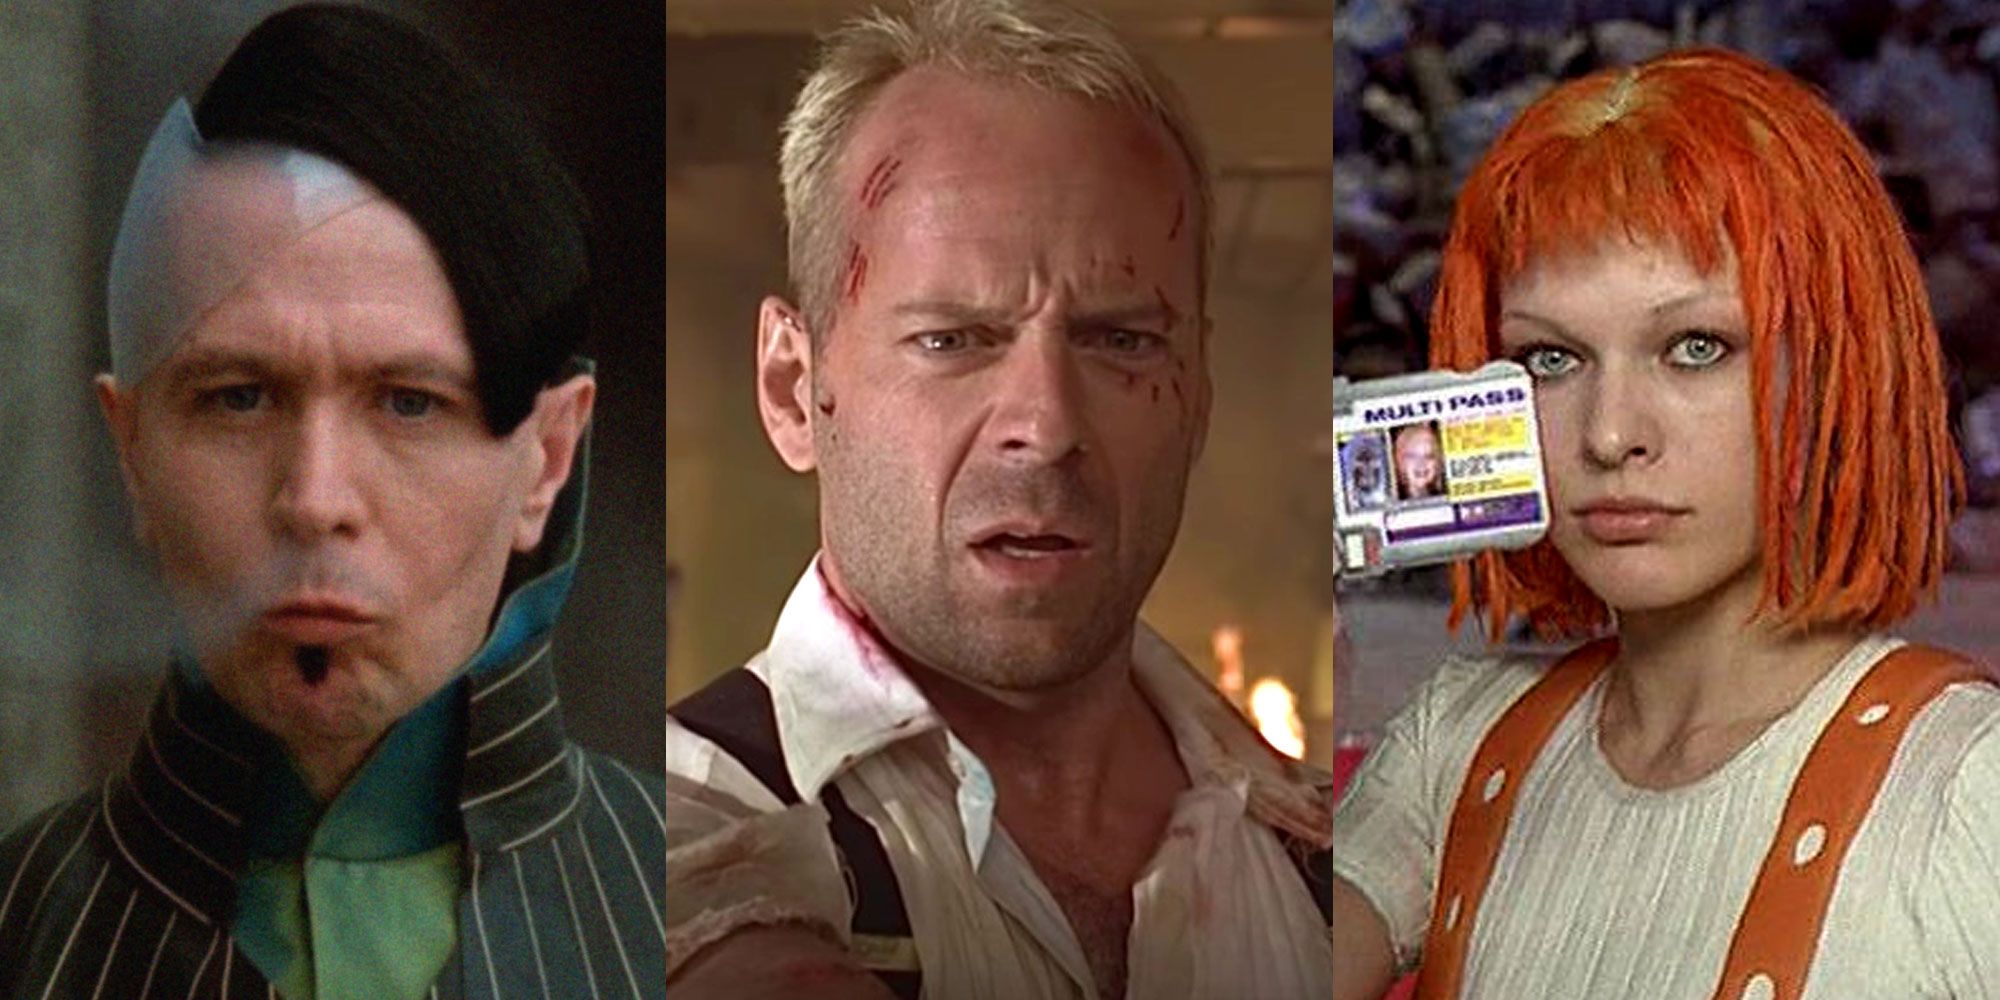 A split image features The Fifth Element characters Zorg, Korben Dallas, and Leeloo